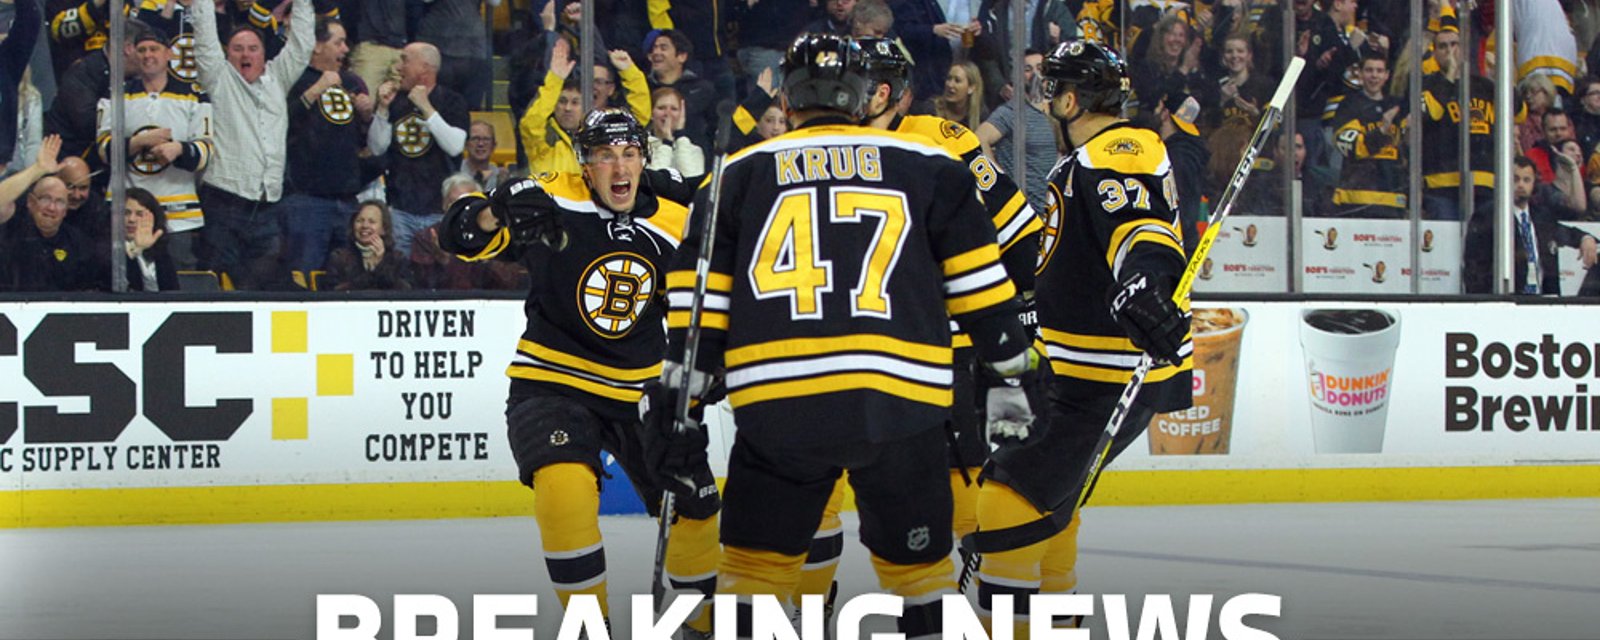 Bruins player reporterdly having immigration problems is unable to play for the team!